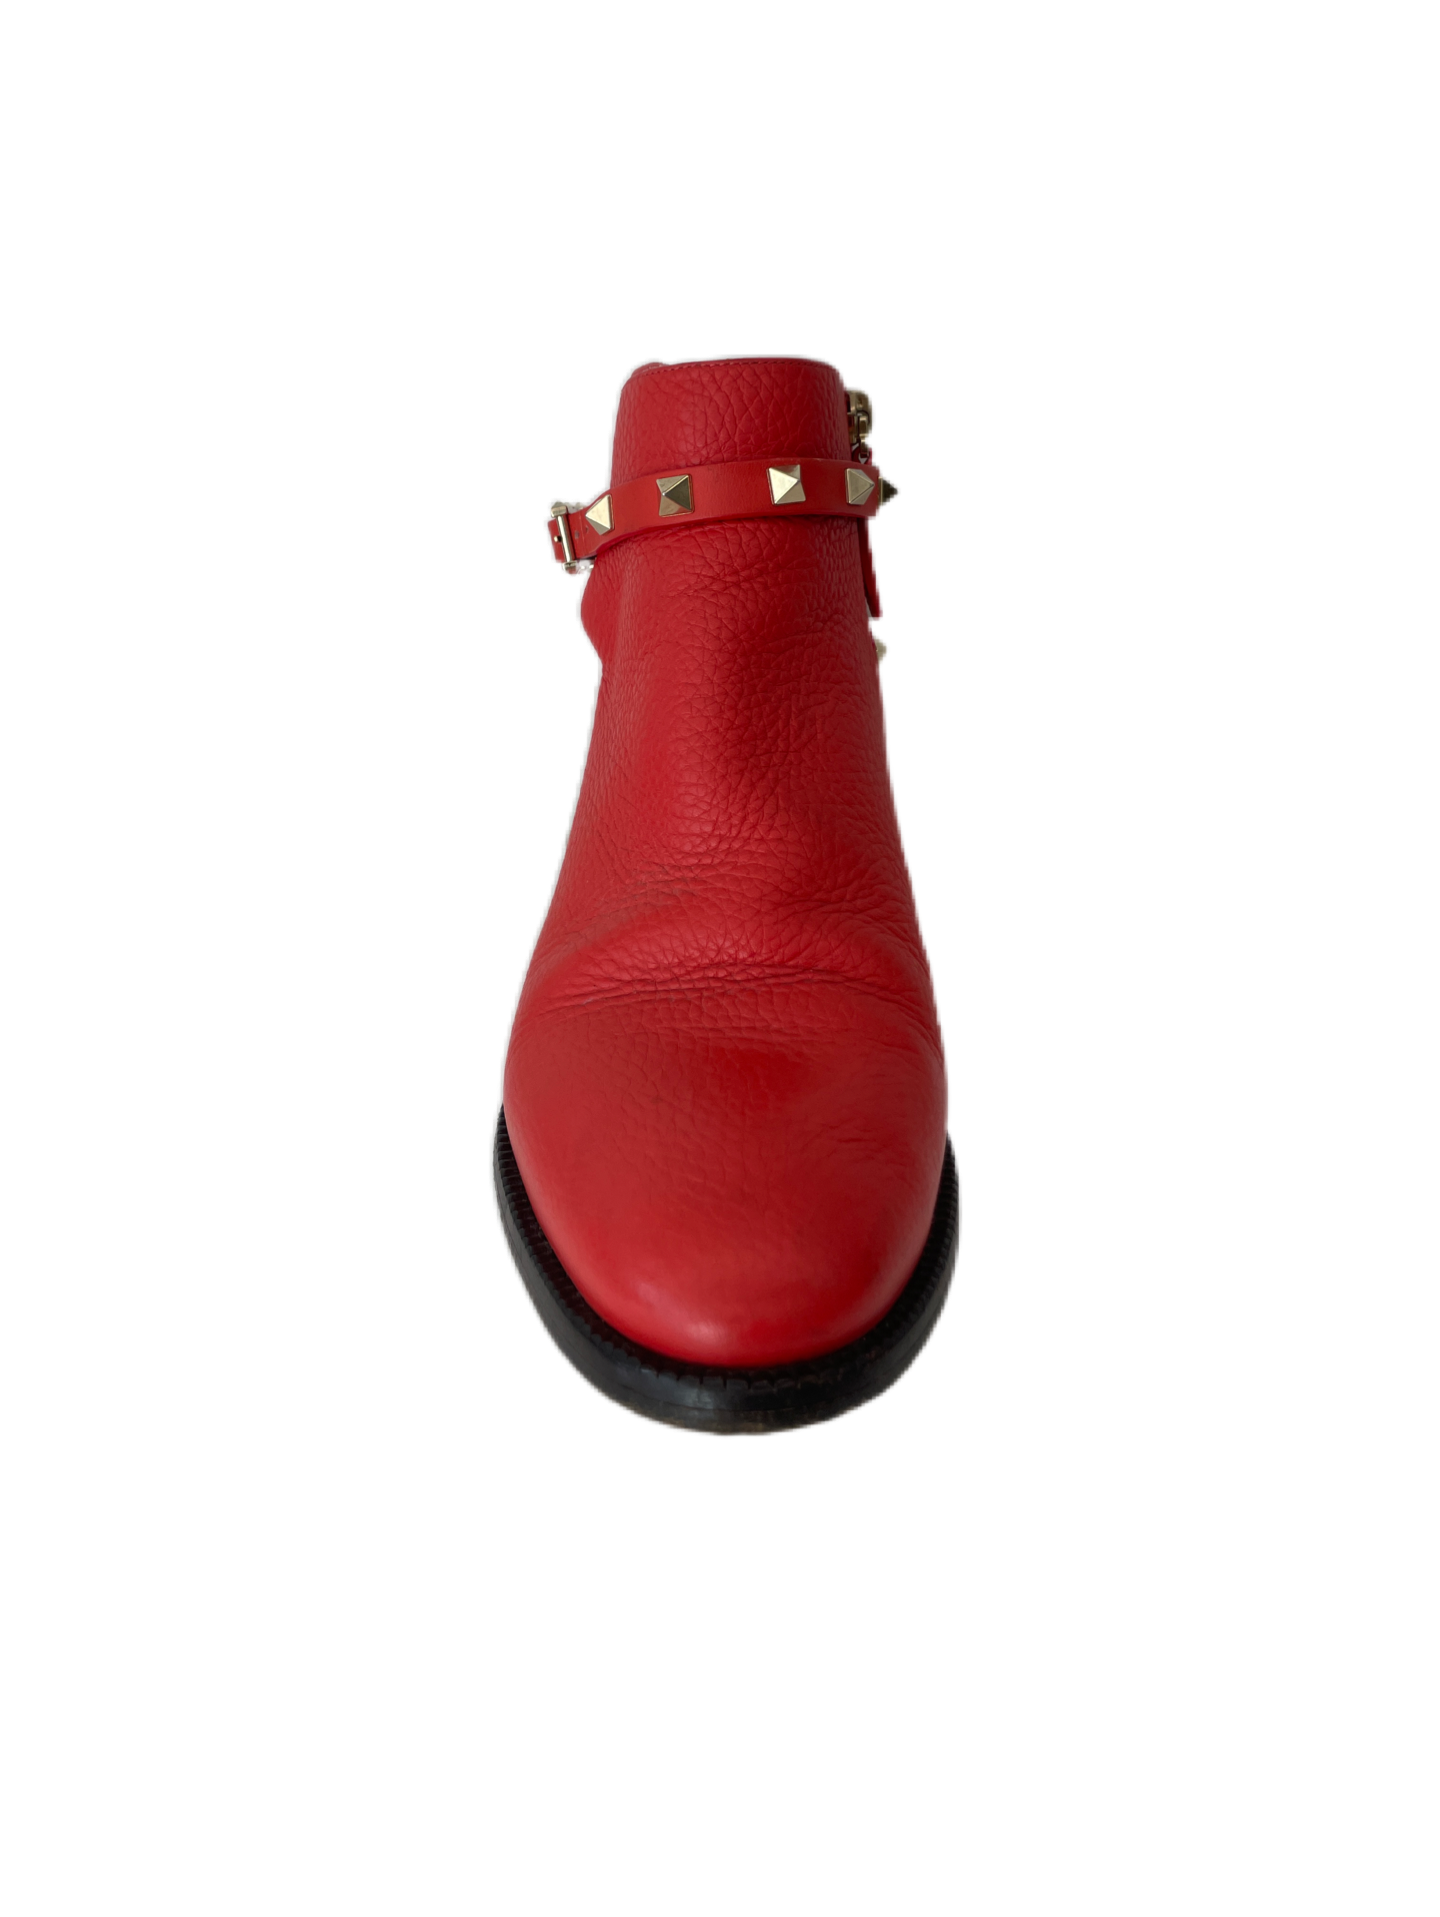 Valentino Red Rockstud Boots. Size: 36.5